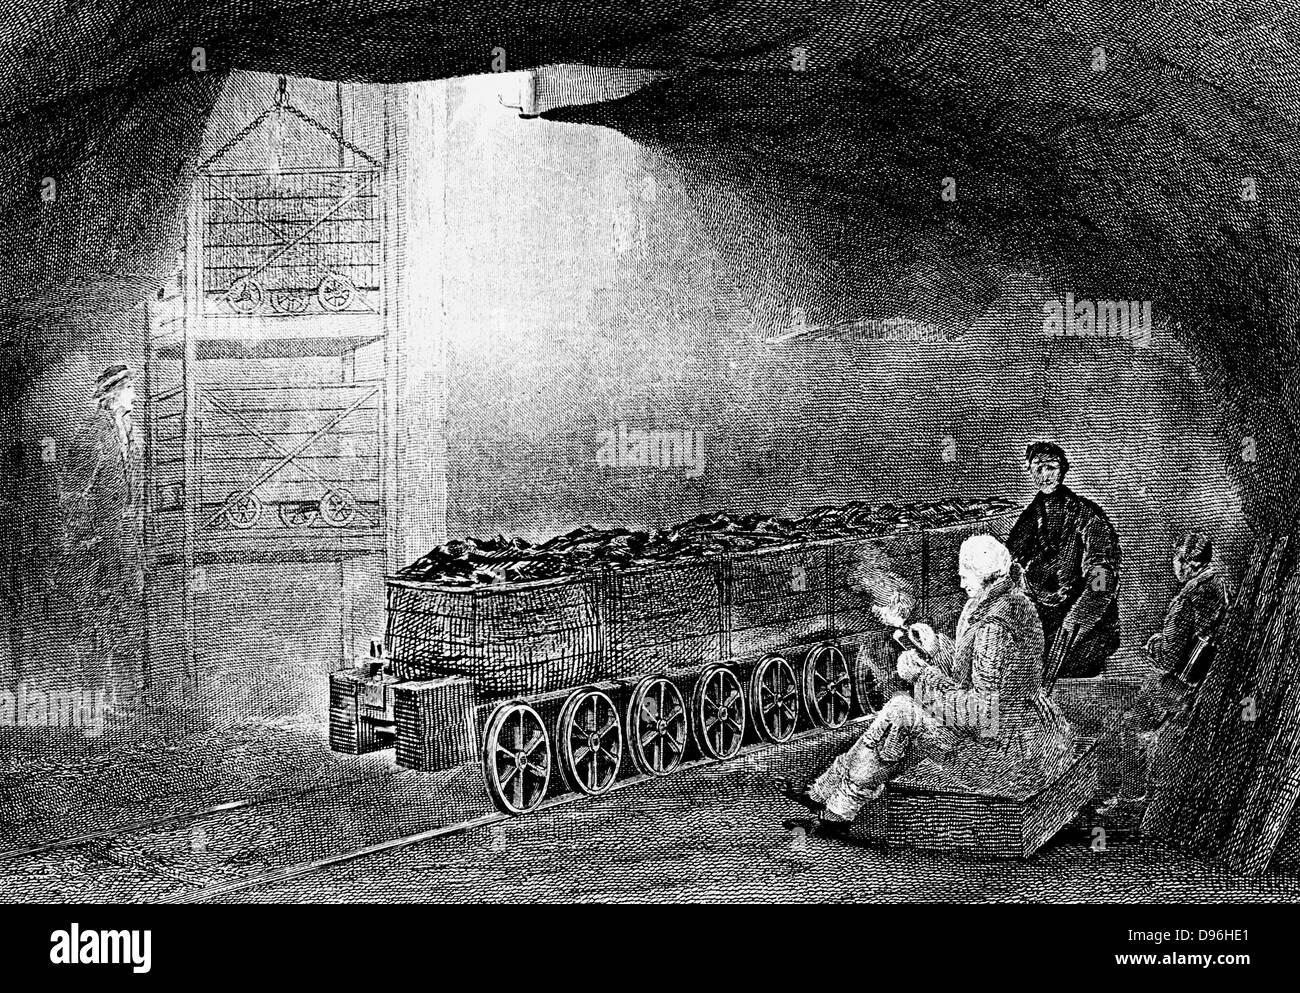 Coal Mining : Bottom of  pit shaft with train of wagons waiting to be hoisted to surface.  Flanged wheels on coal wagon.  From W Fordyce 'A History of Coal, Coke, Coal Fields ...' London, 1860. Engraving. Stock Photo